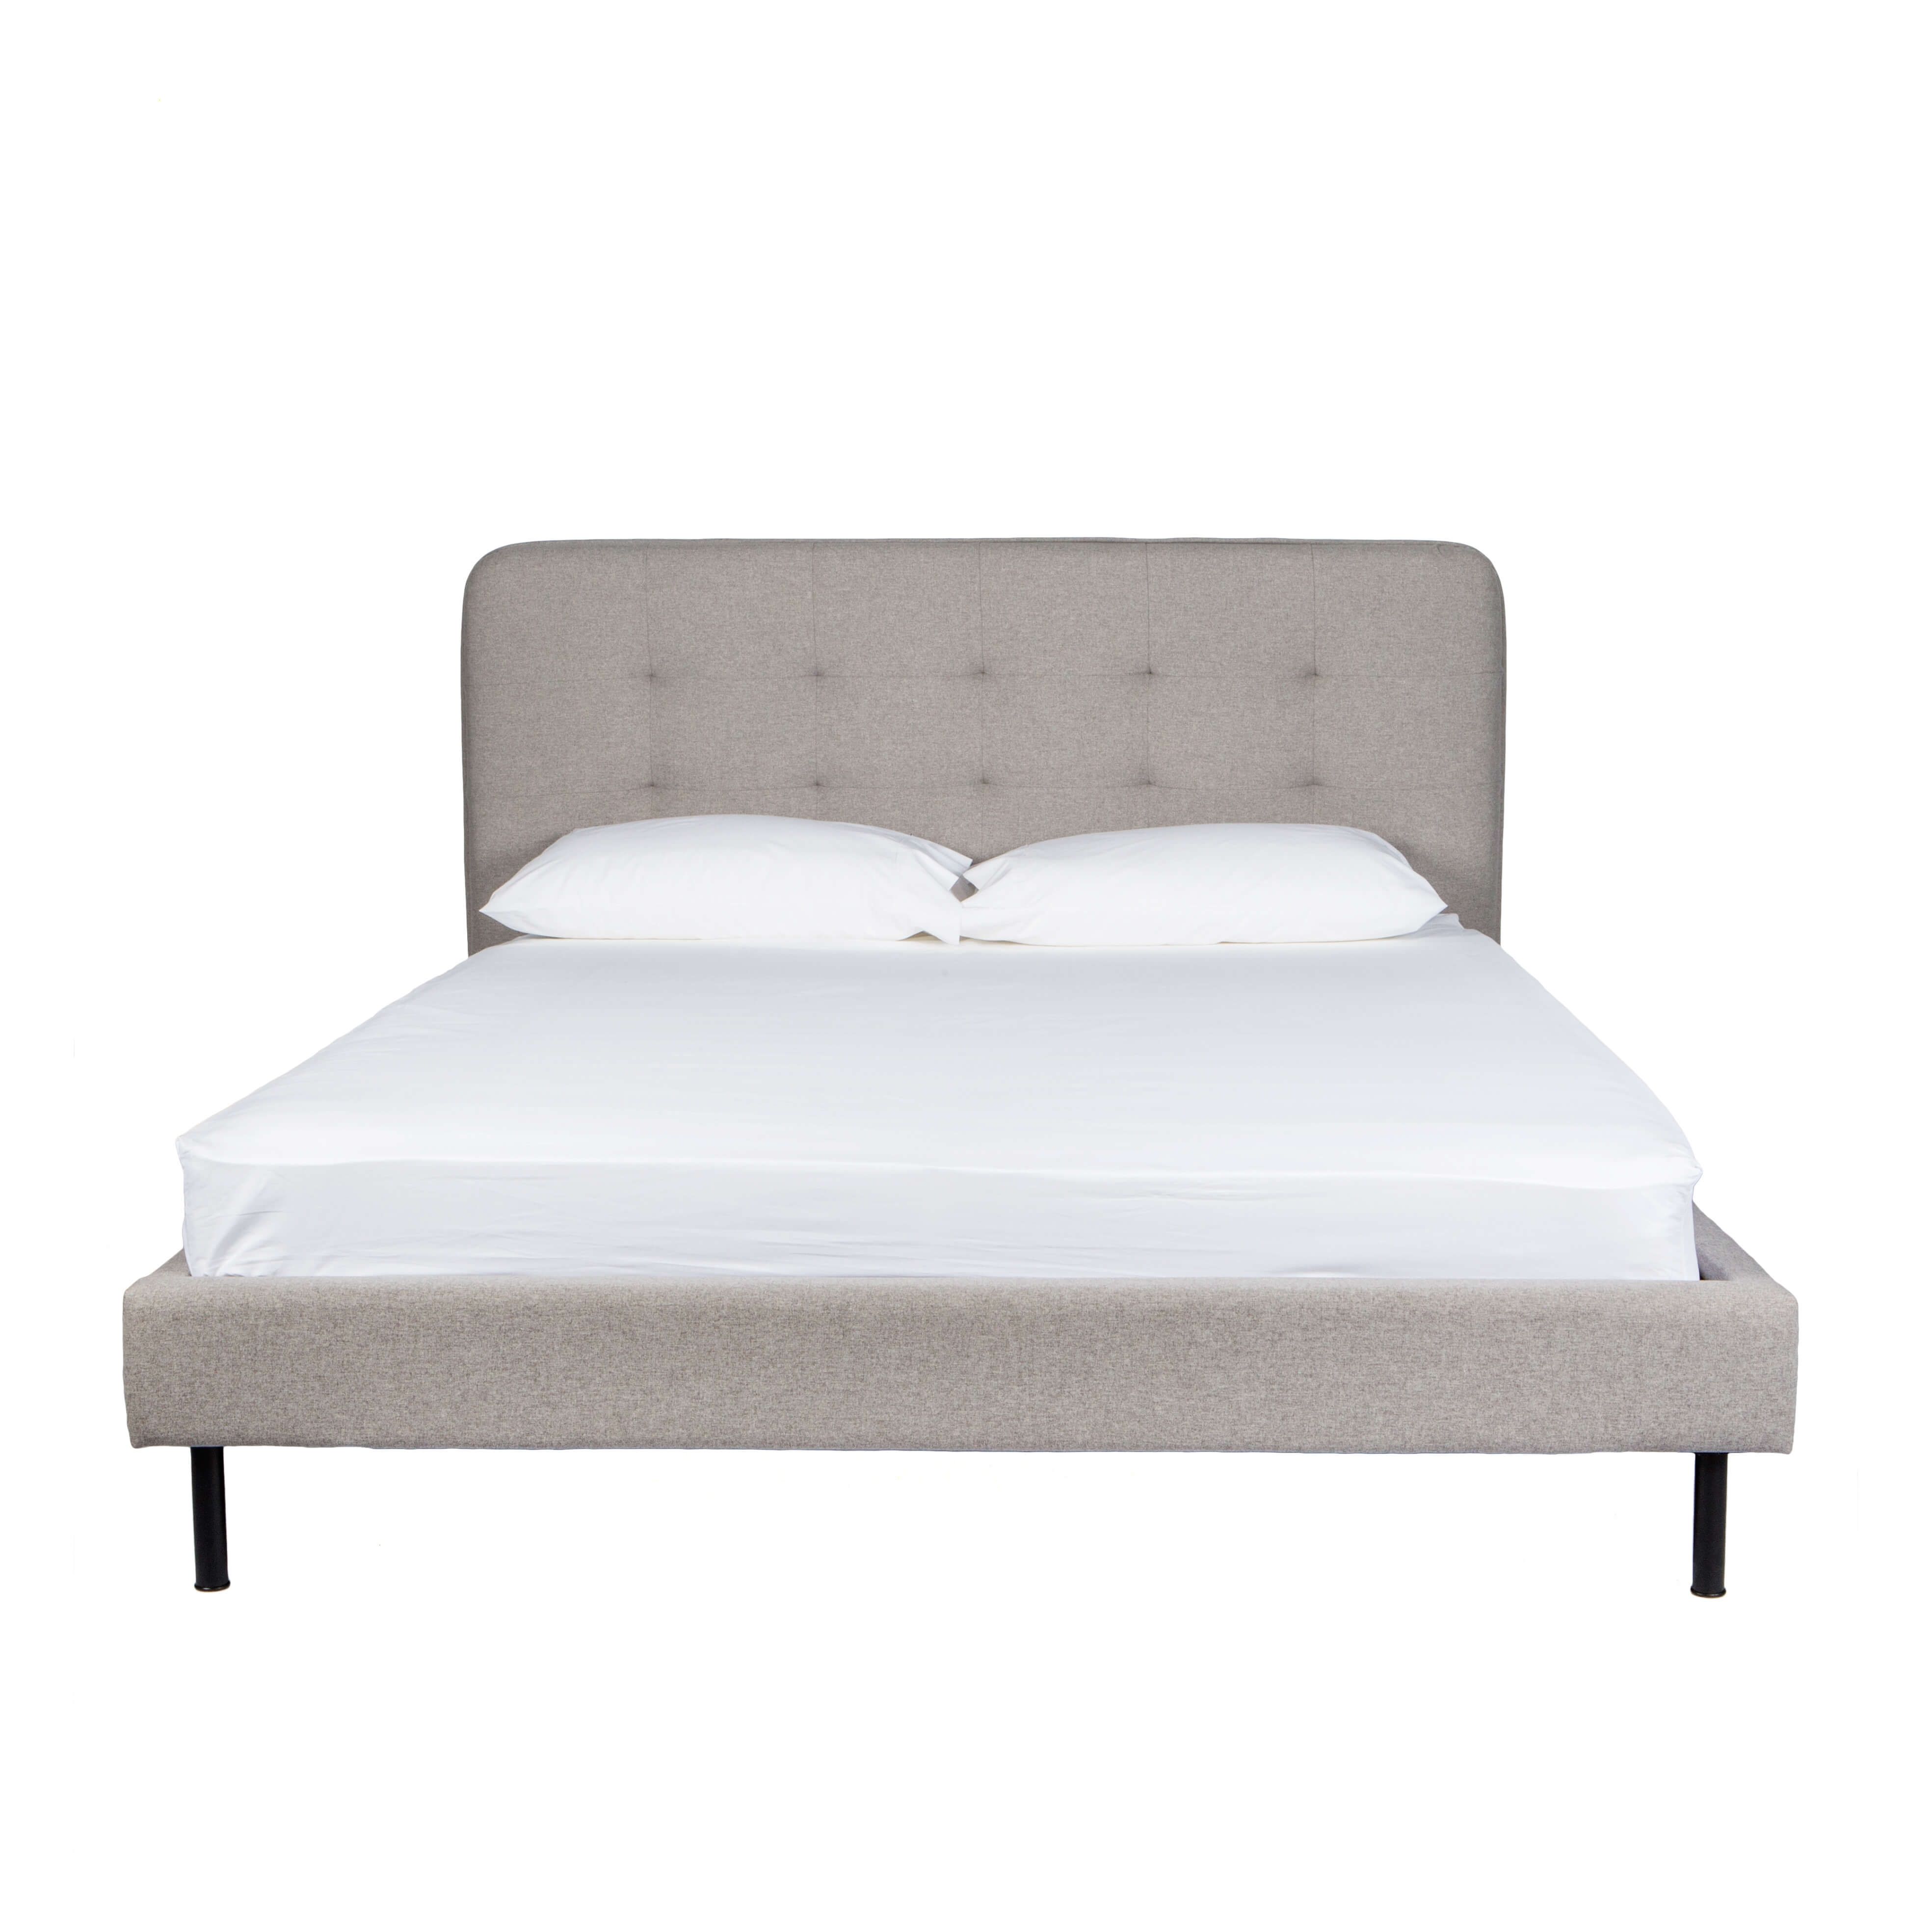 Queen Size Bed With Tufted Bedhead – Jaxon – Grey Inside Best And Newest Jaxon Grey Sideboards (View 14 of 20)